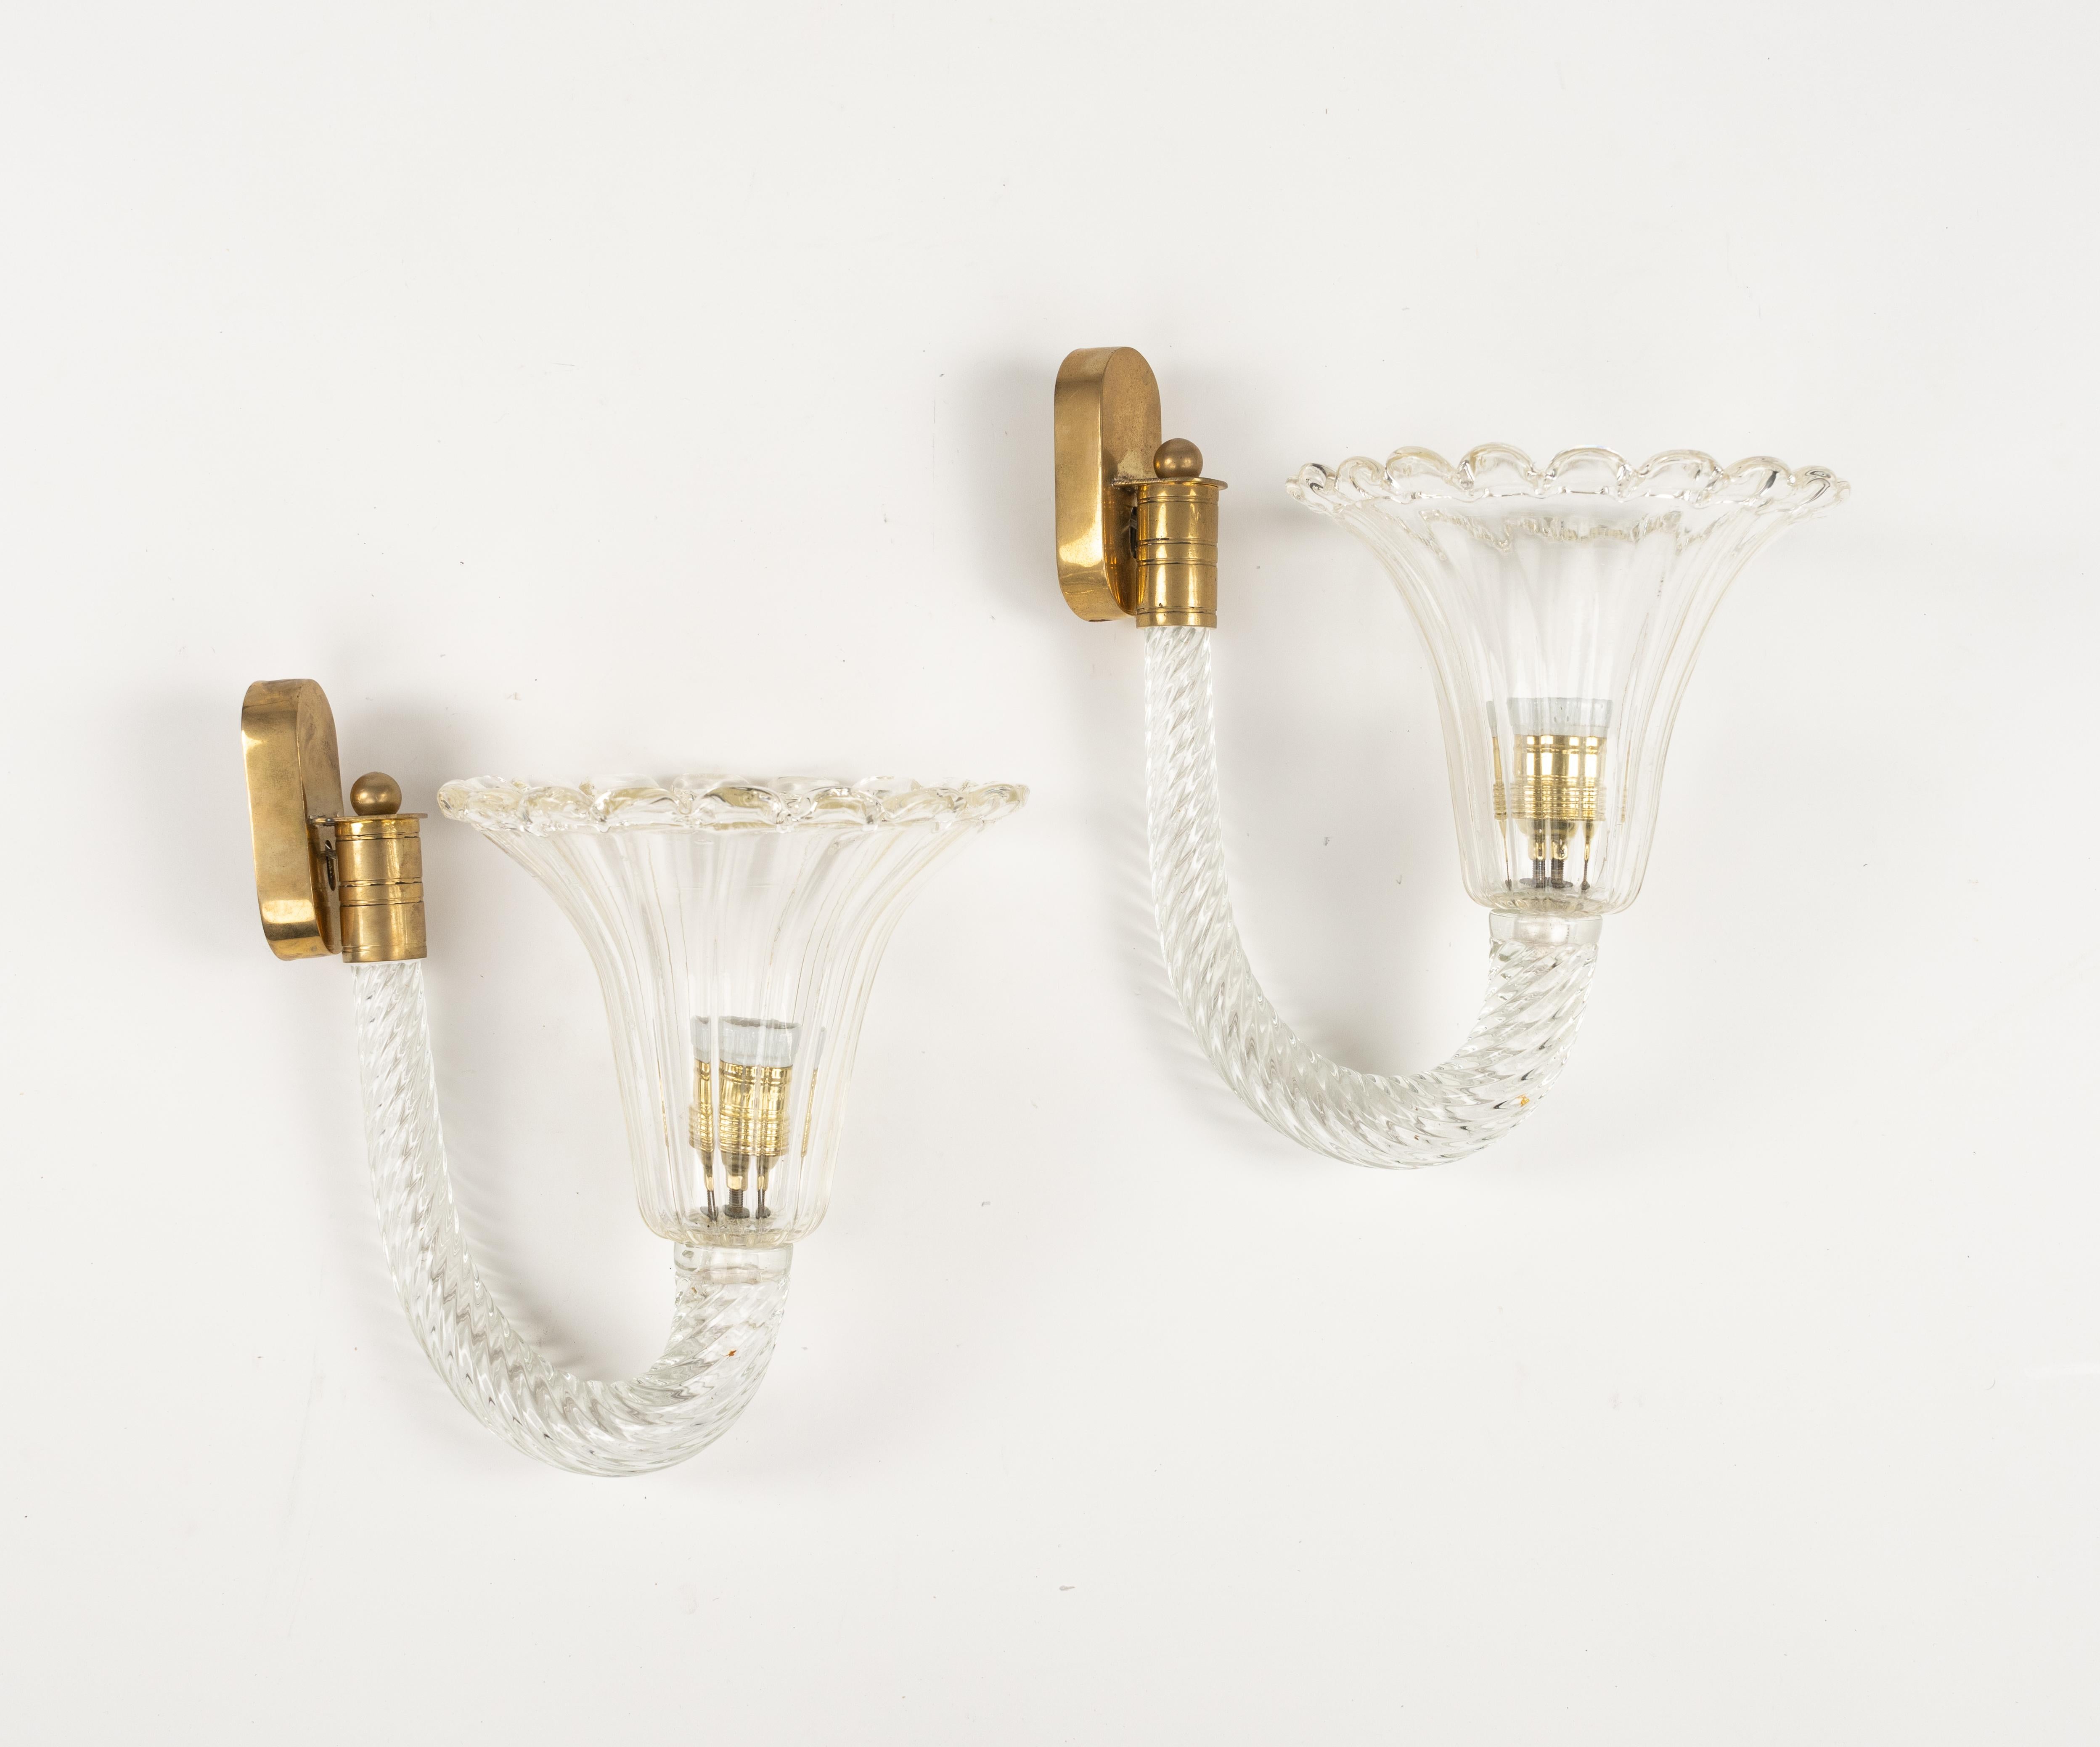 Pair of Sconces Murano Glass & Brass Barovier & Toso Style, Italy 1950s For Sale 6